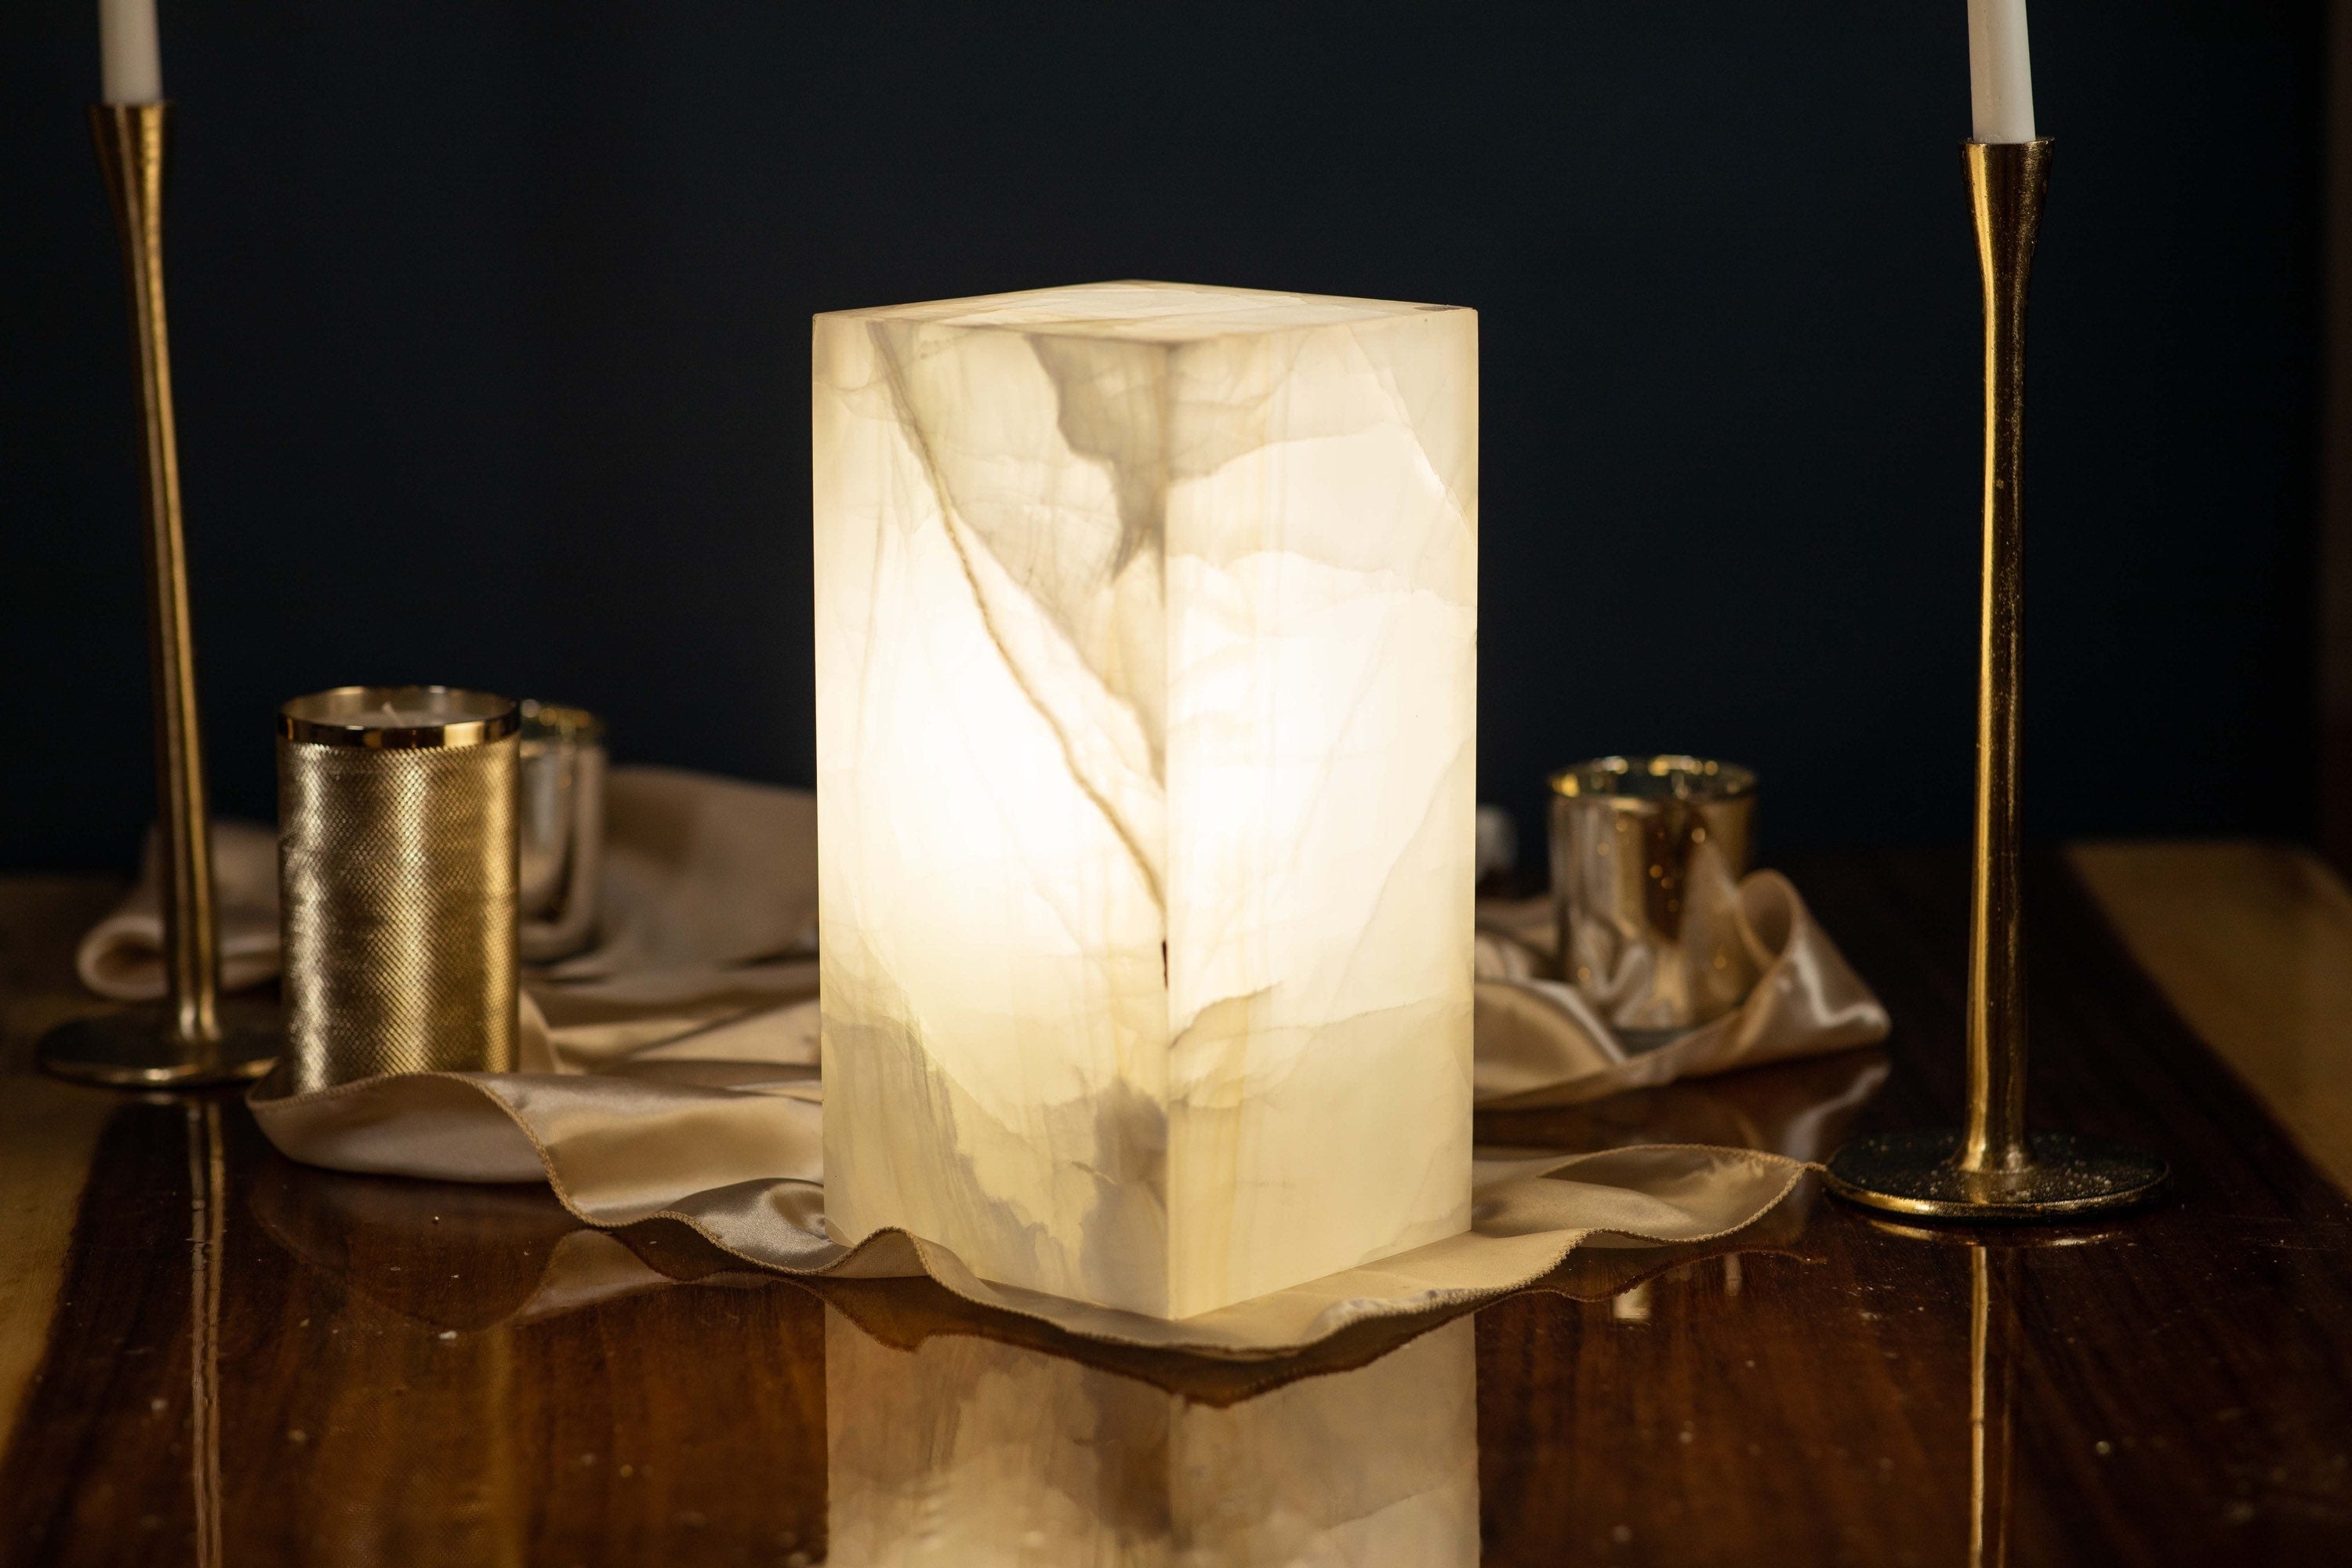 Natural Stone Table Lamps for Mood Lighting - Hand-carved and polished to perfection, they'll bring a touch of nature into your home.